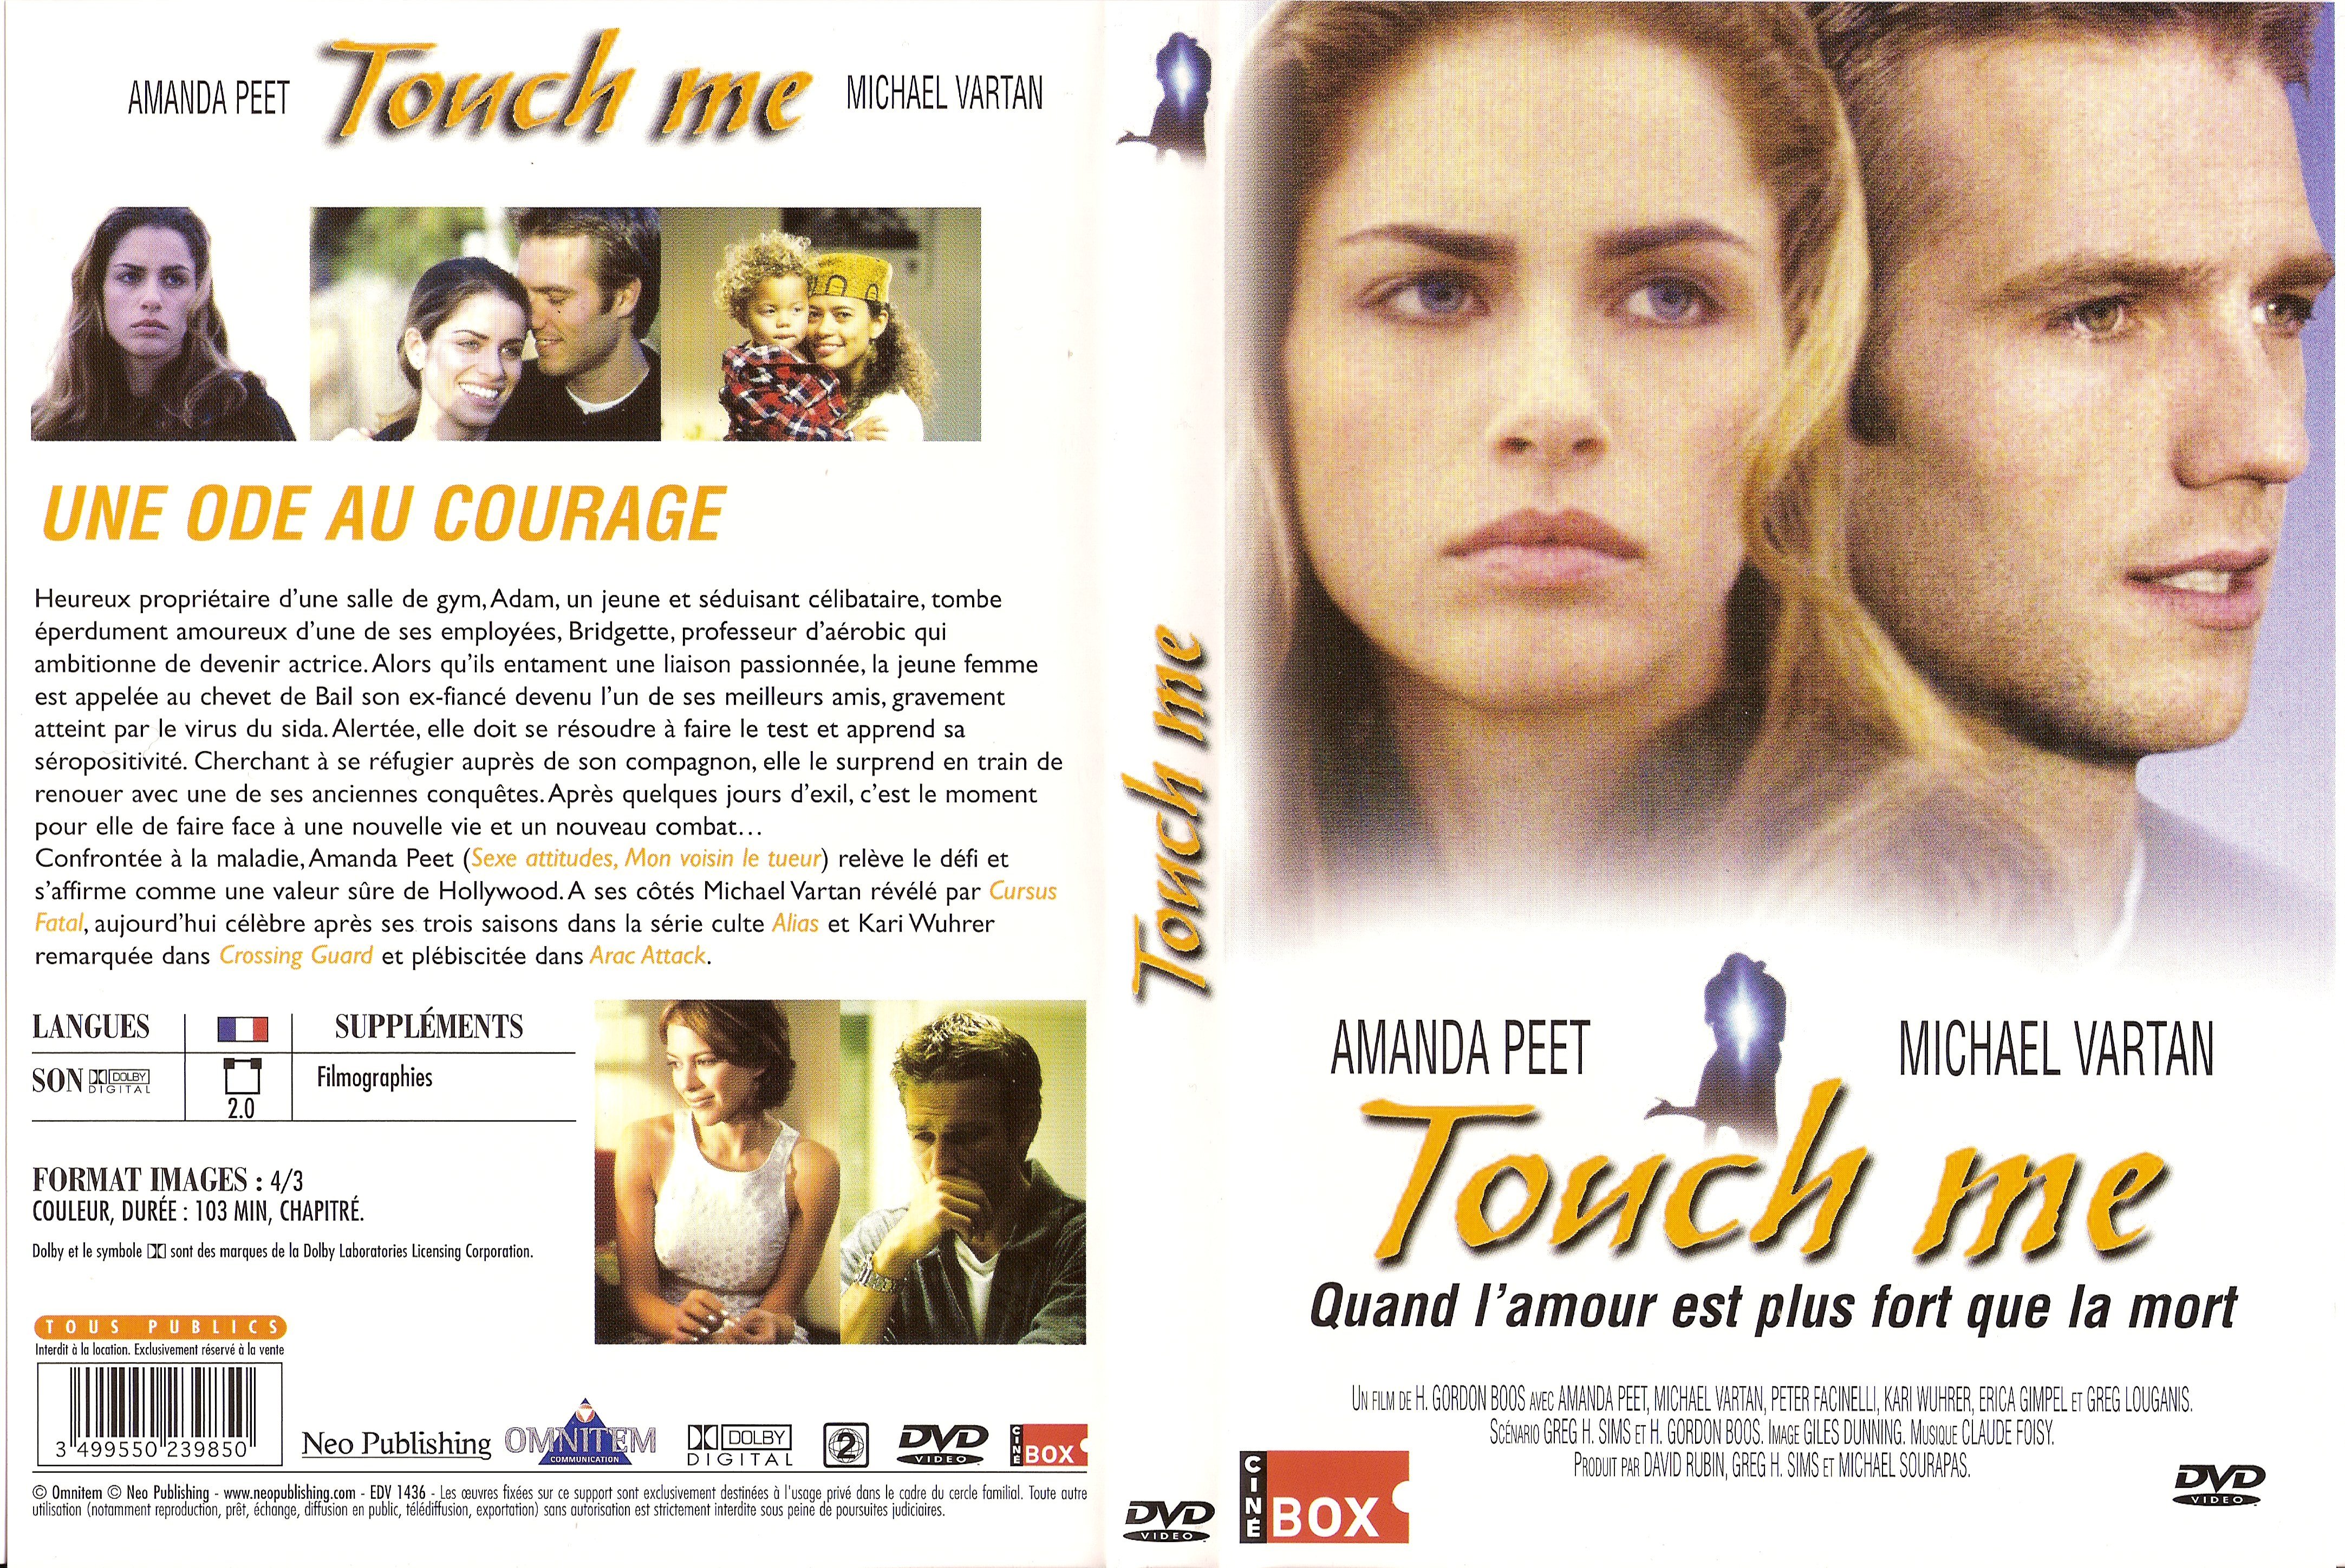 Jaquette DVD Touch me